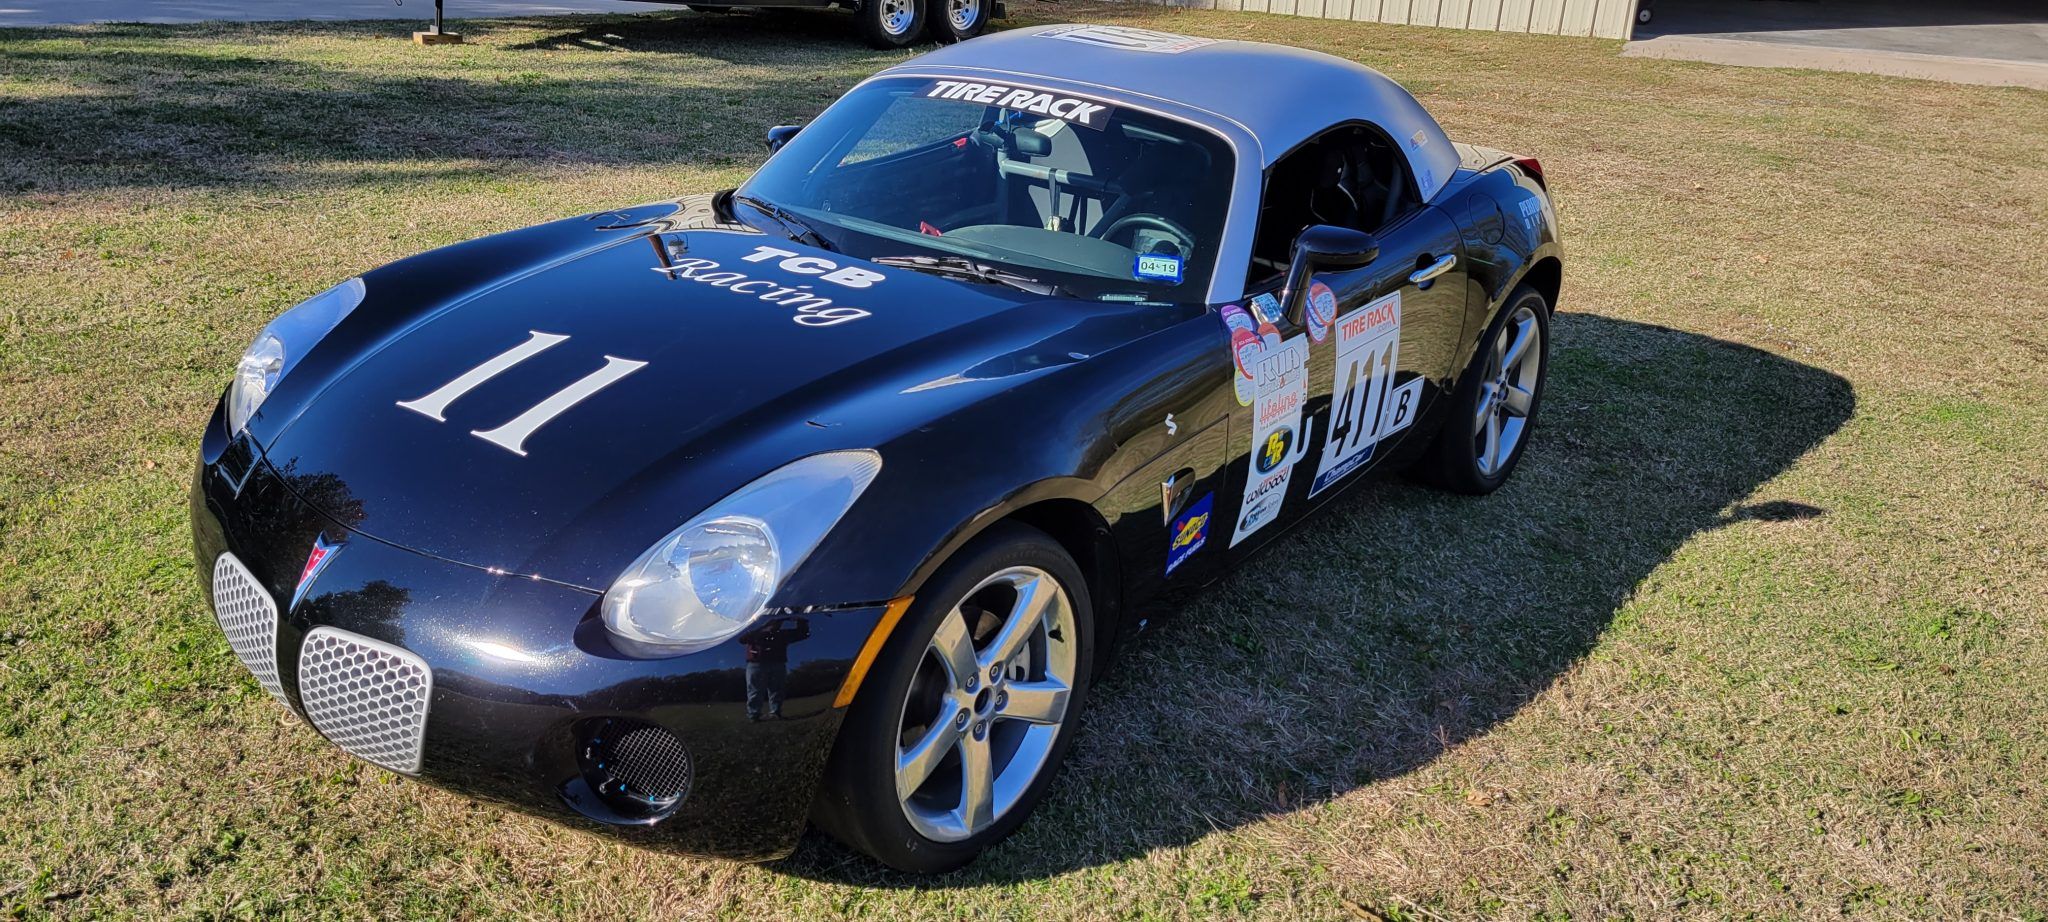 10 Things Most People About The Pontiac Solstice